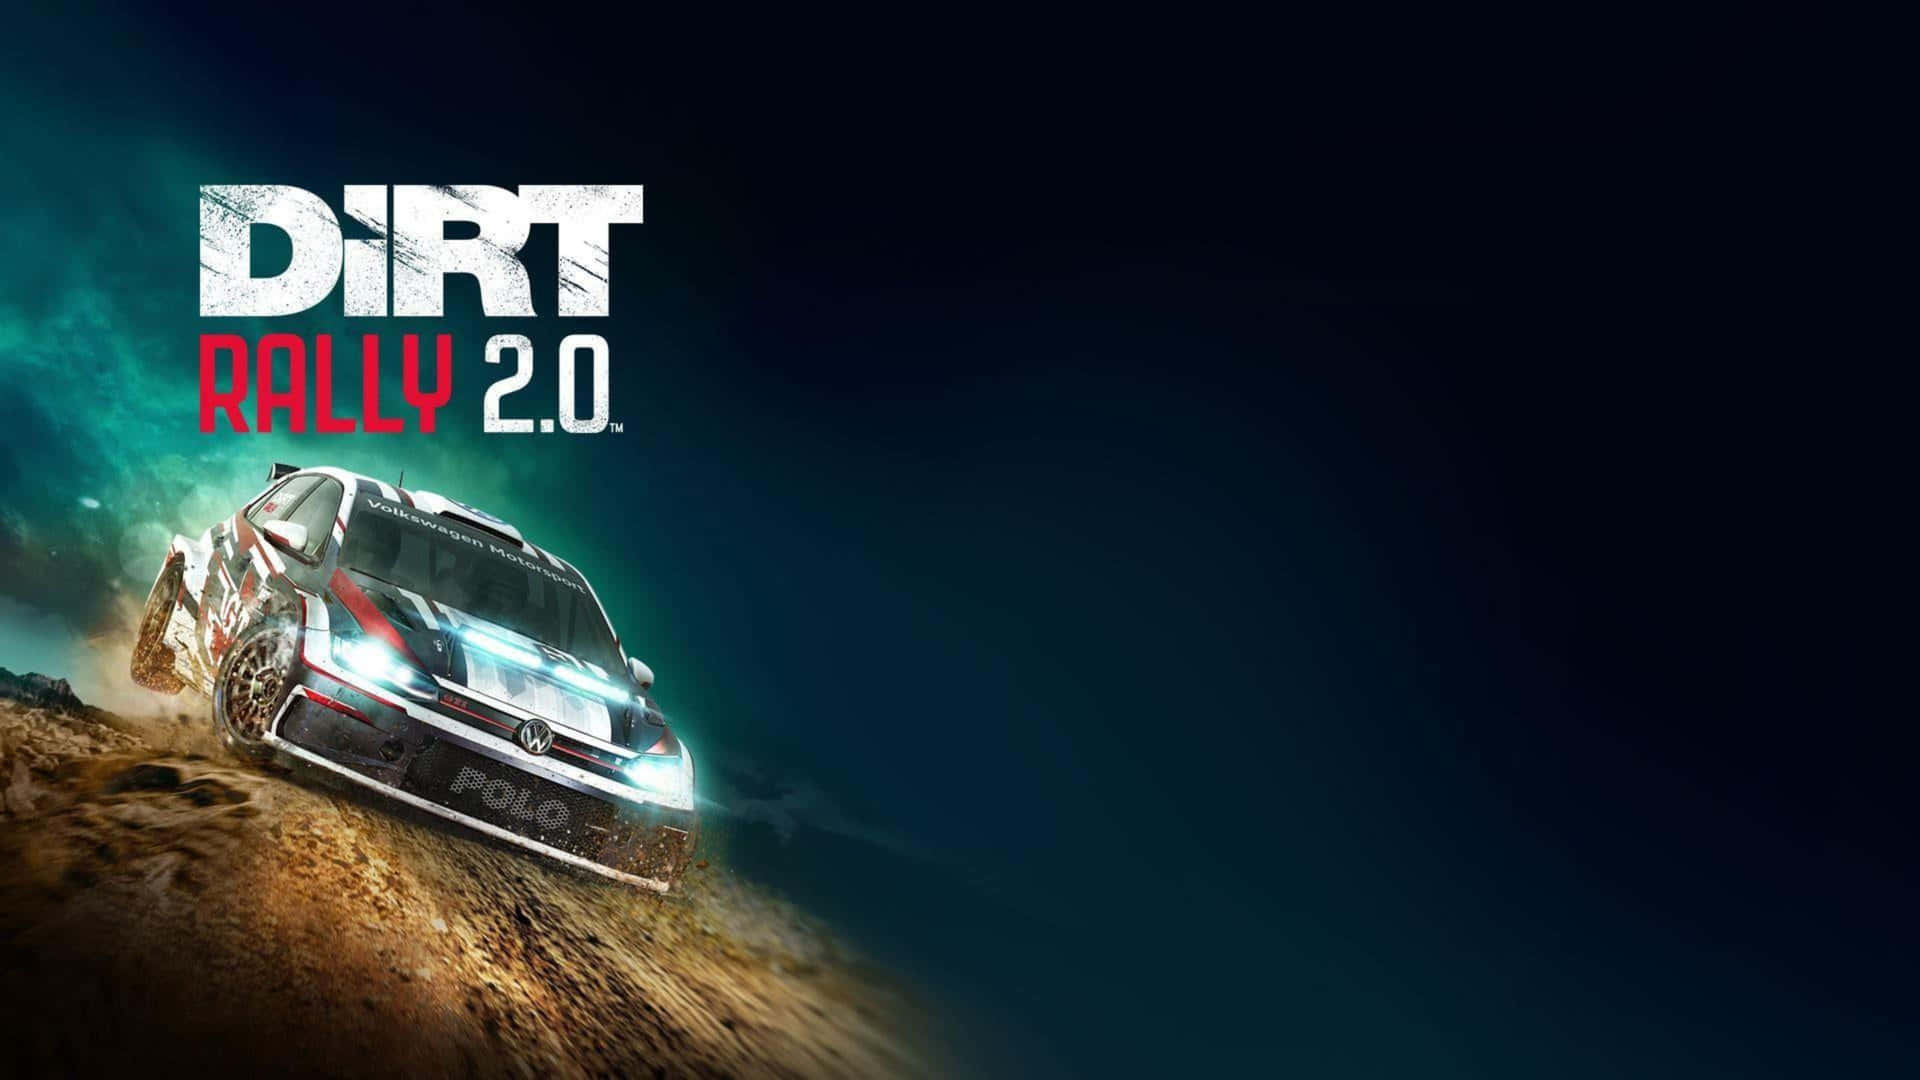 Feel the excitement in every turn with 4K Dirt Rally